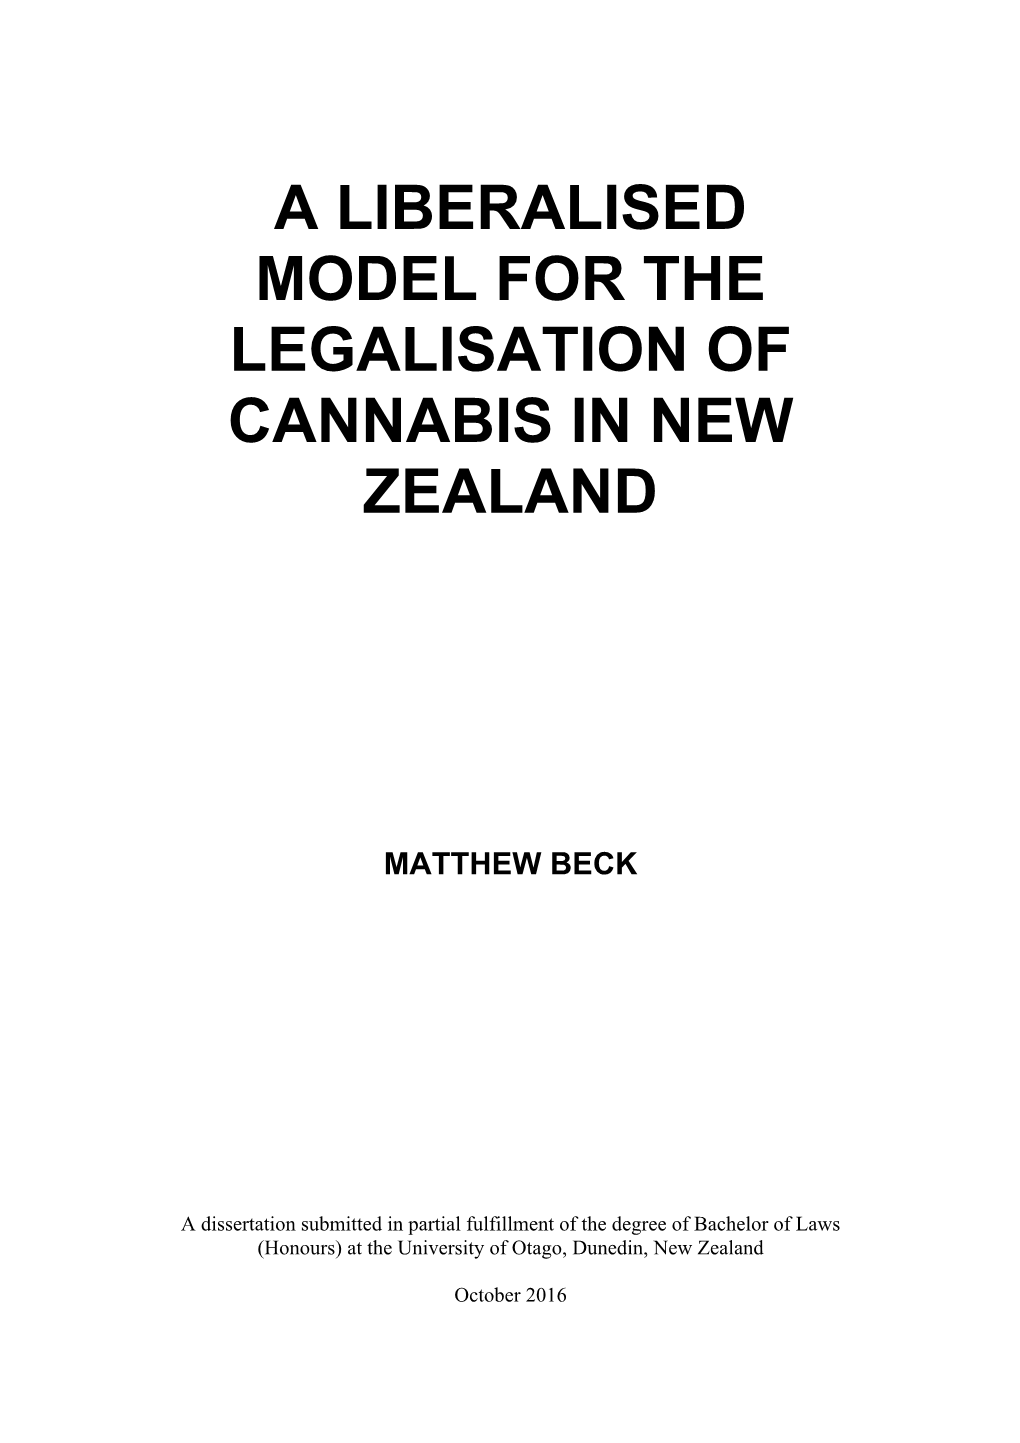 A Liberalised Model for the Legalisation of Cannabis in New Zealand